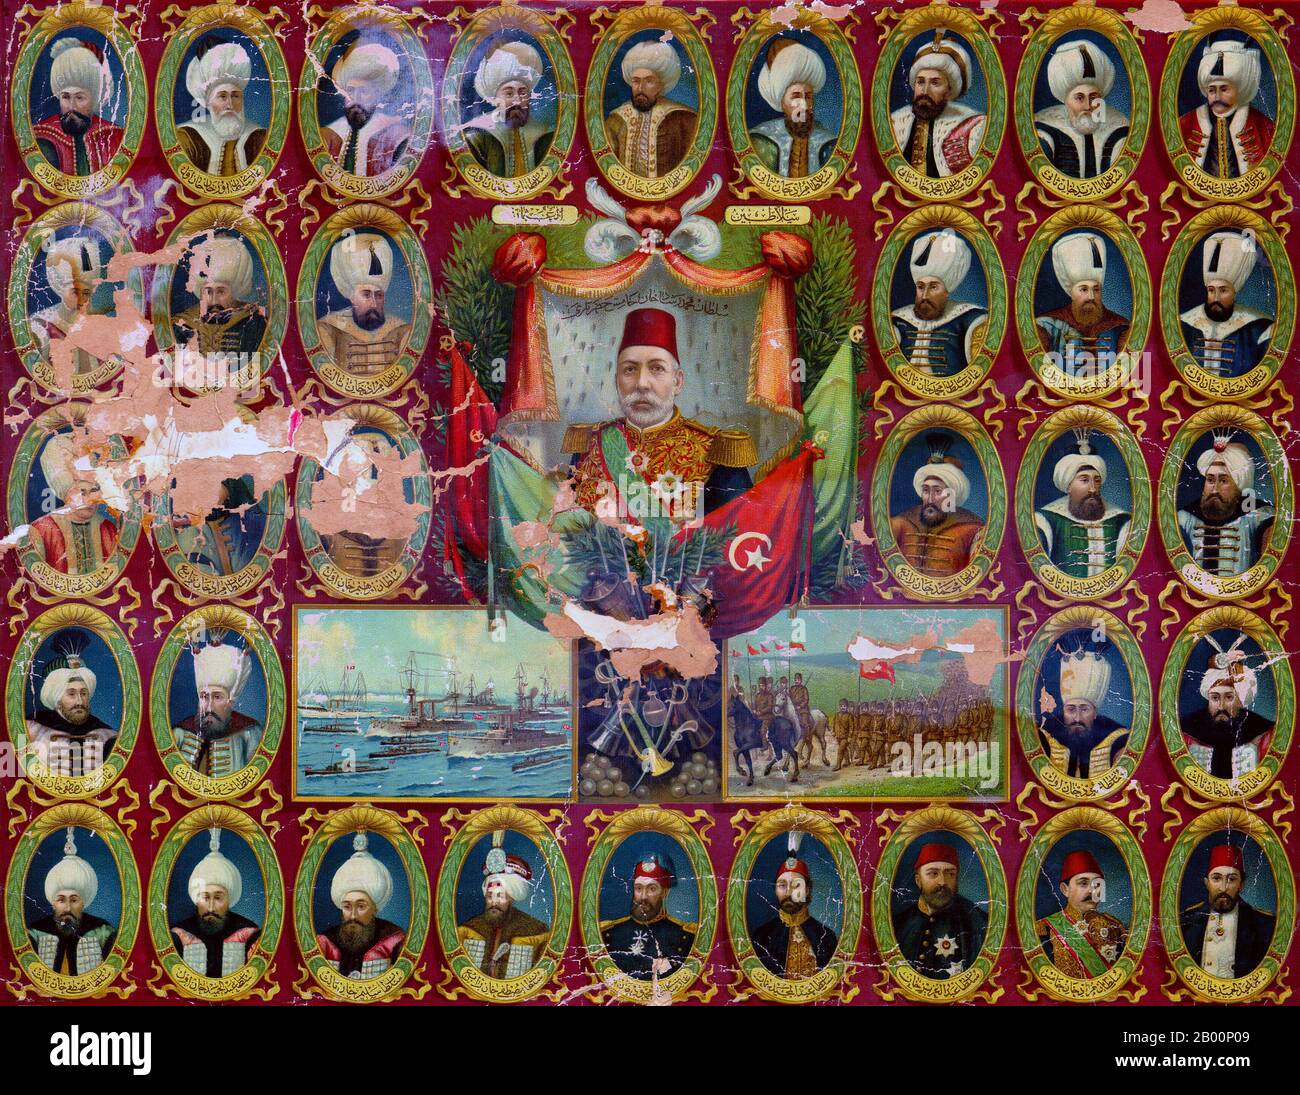 Turkey/Germany: Poster showing Sultans of the Ottoman Dynasty, from Osman I (upper left corner) to Mehmed V (large portrait in the center). Printed in Germany during the reign of Mehmed V (1909–1918).  The Ottoman Empire's power and prestige peaked in the 16th and 17th centuries, particularly during the reign of Suleiman the Magnificent. The empire was often at odds with the Holy Roman Empire in its steady advance towards Central Europe through the Balkans and the southern part of the Polish-Lithuanian Commonwealth. Stock Photo